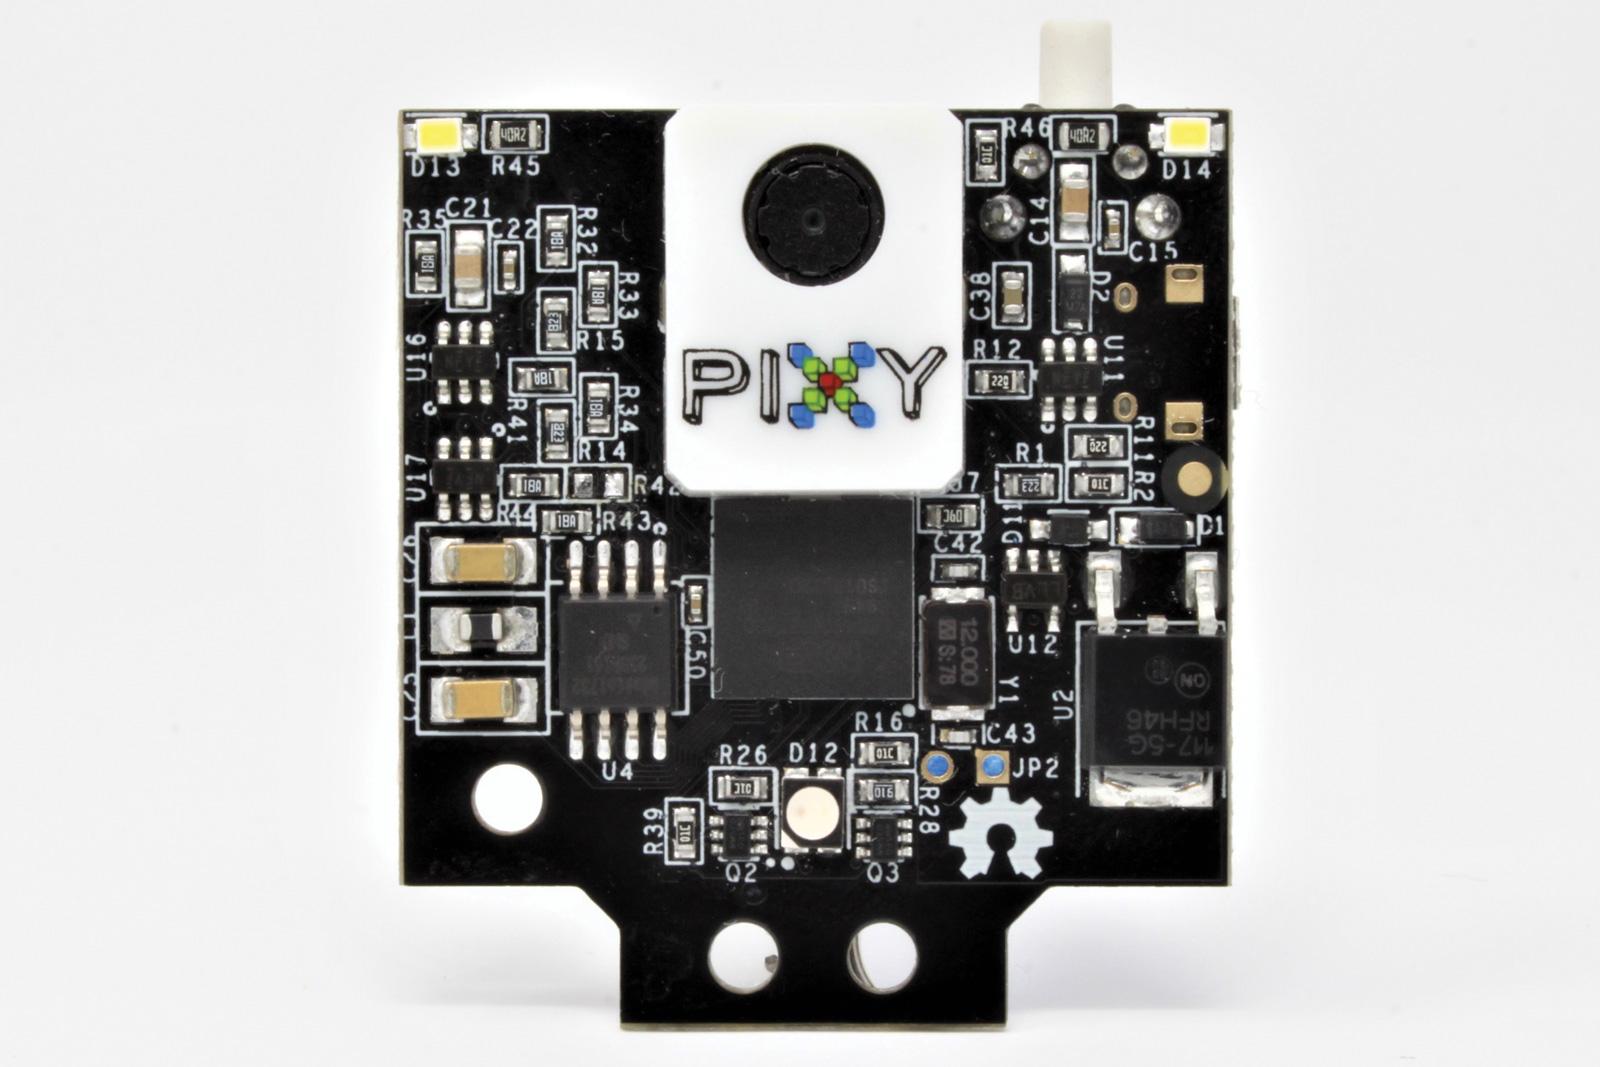 The Pixy2 Camera at actual size.